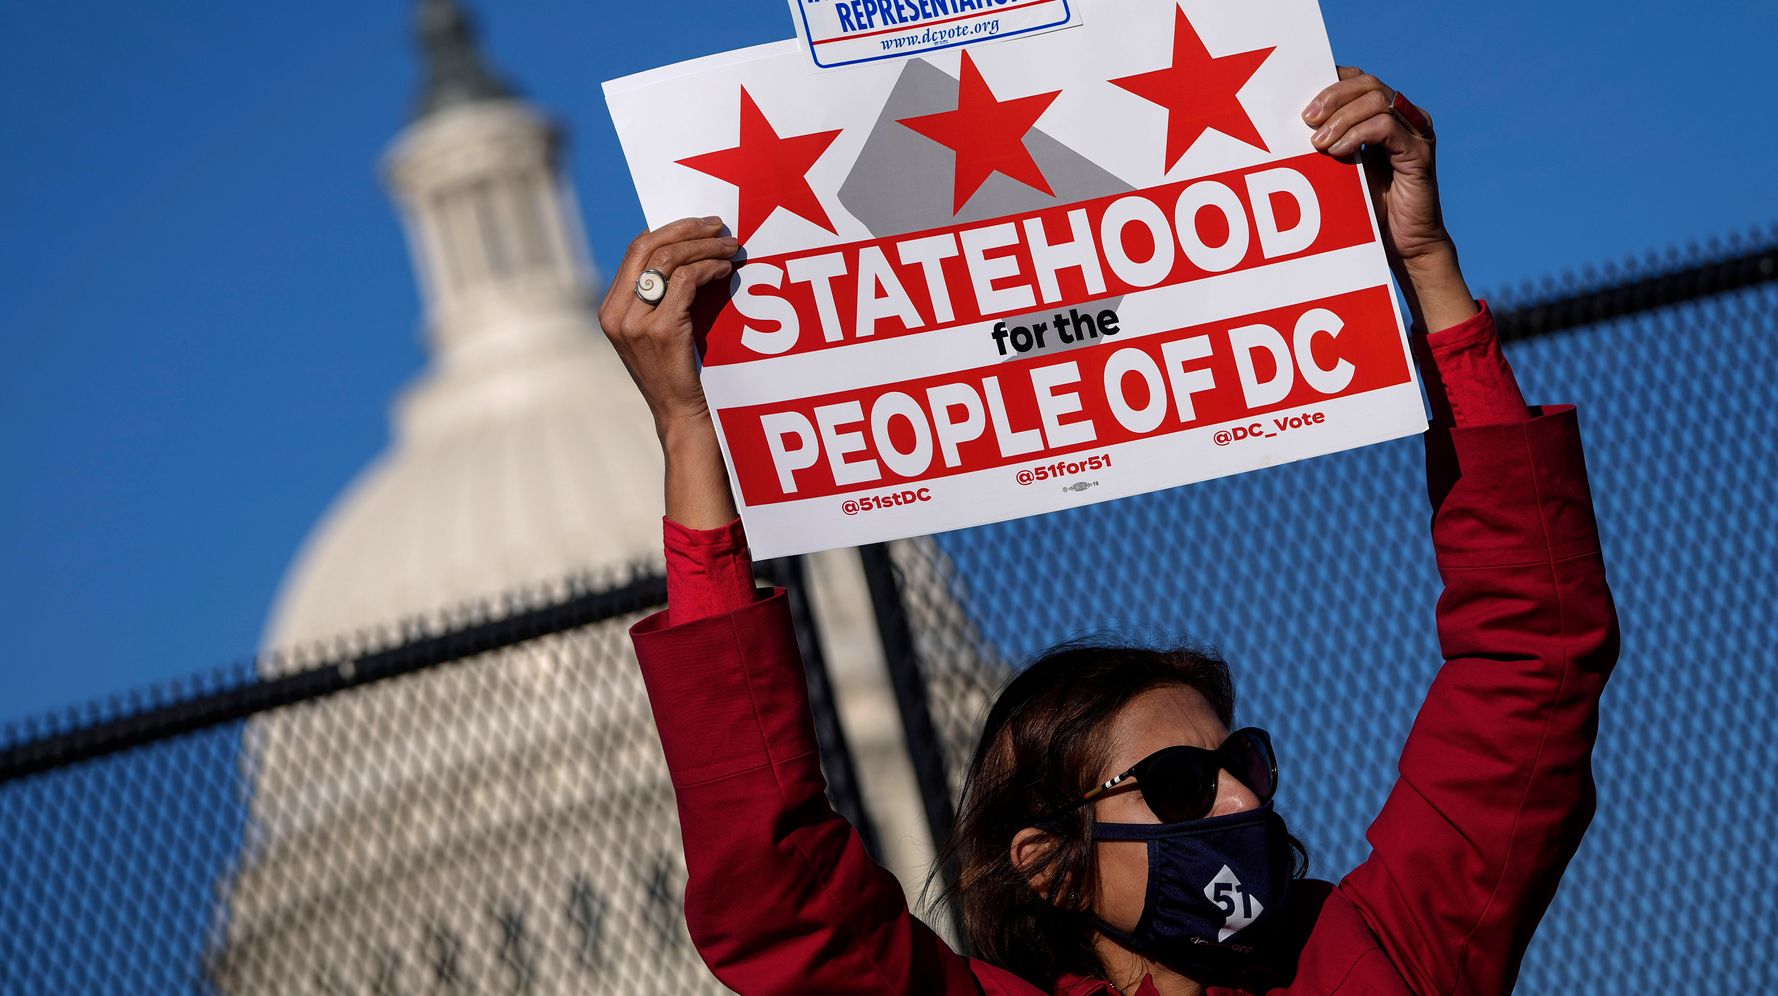 House Votes To Make Dc The 51st State Huffpost Uk Politics 9225